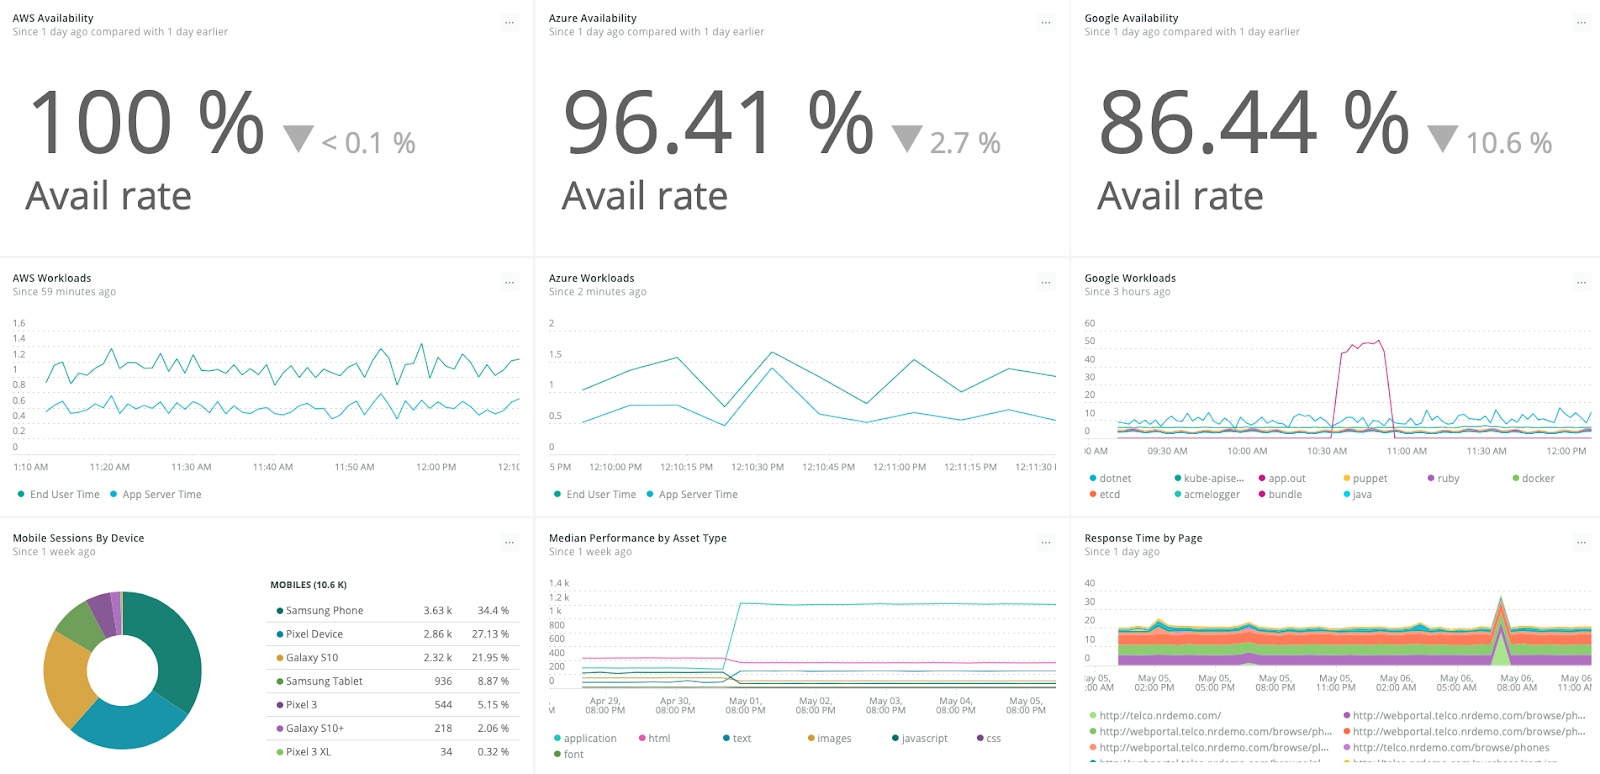 New Relic Dashboard showing availability by cloud type